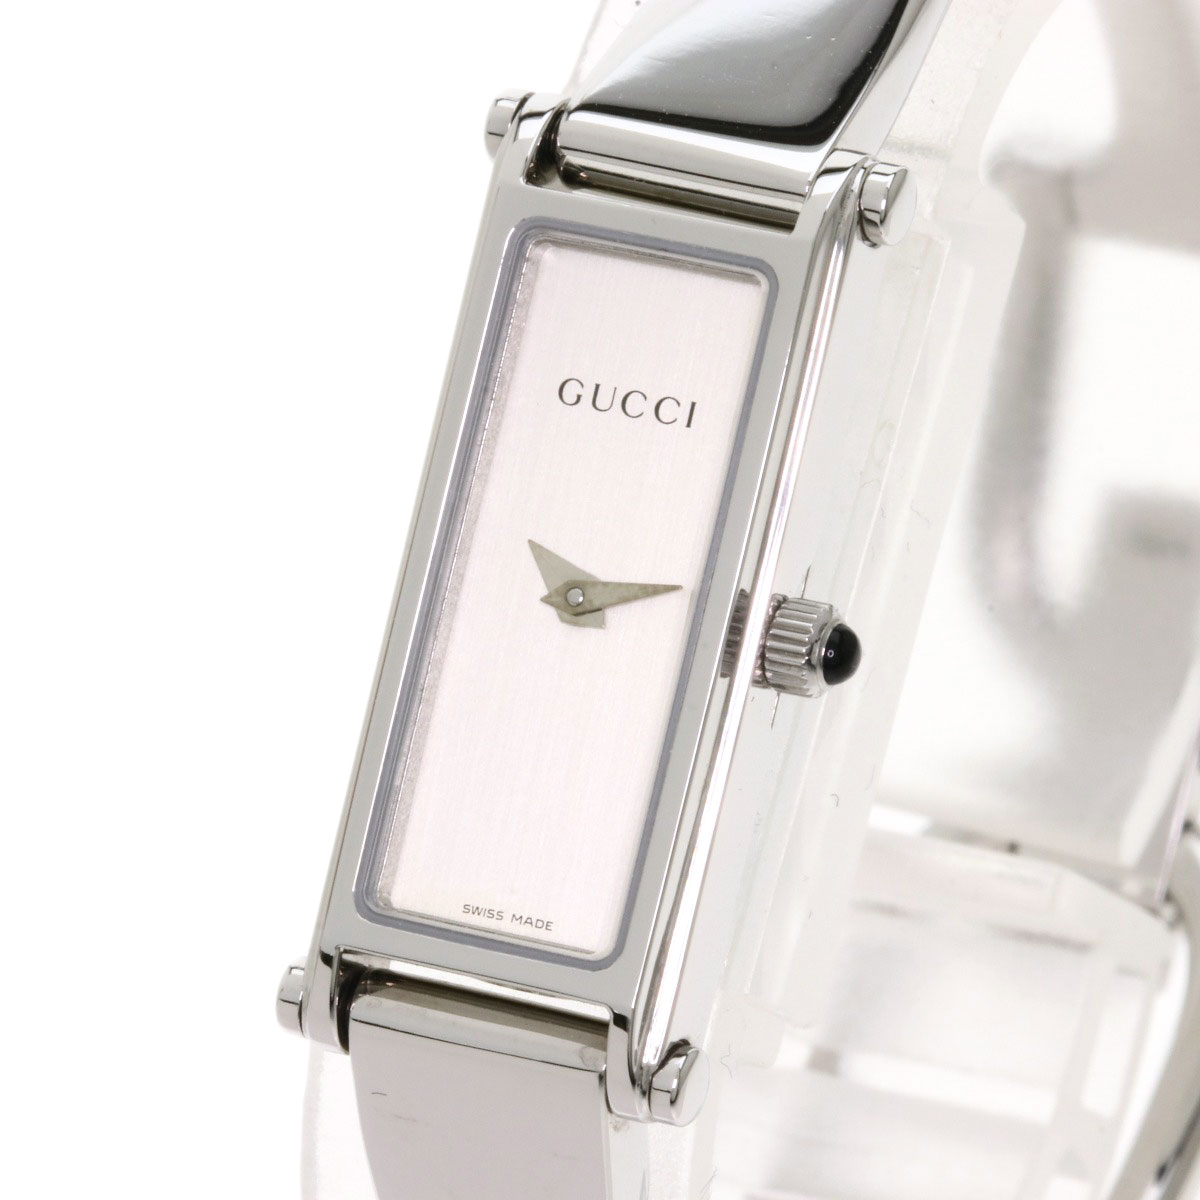 GUCCI Square face Watches 1500L Stainless Steel/Stainless Steel Ladies ...